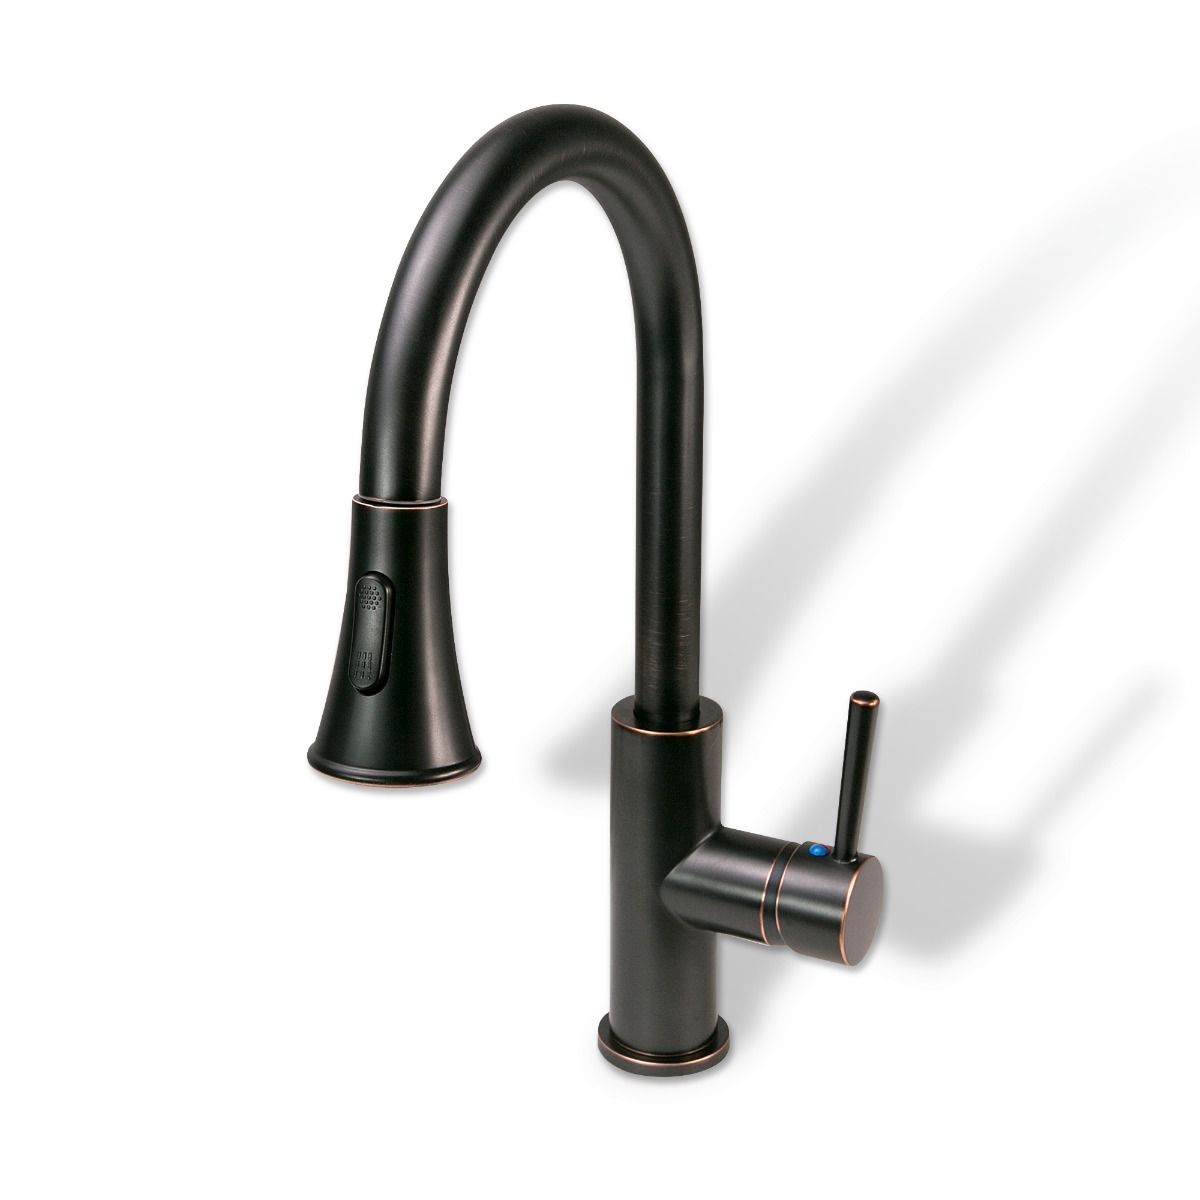 Leon Oil Rubbed Bronze Kitchen Sink Faucet With Pull Down Spout